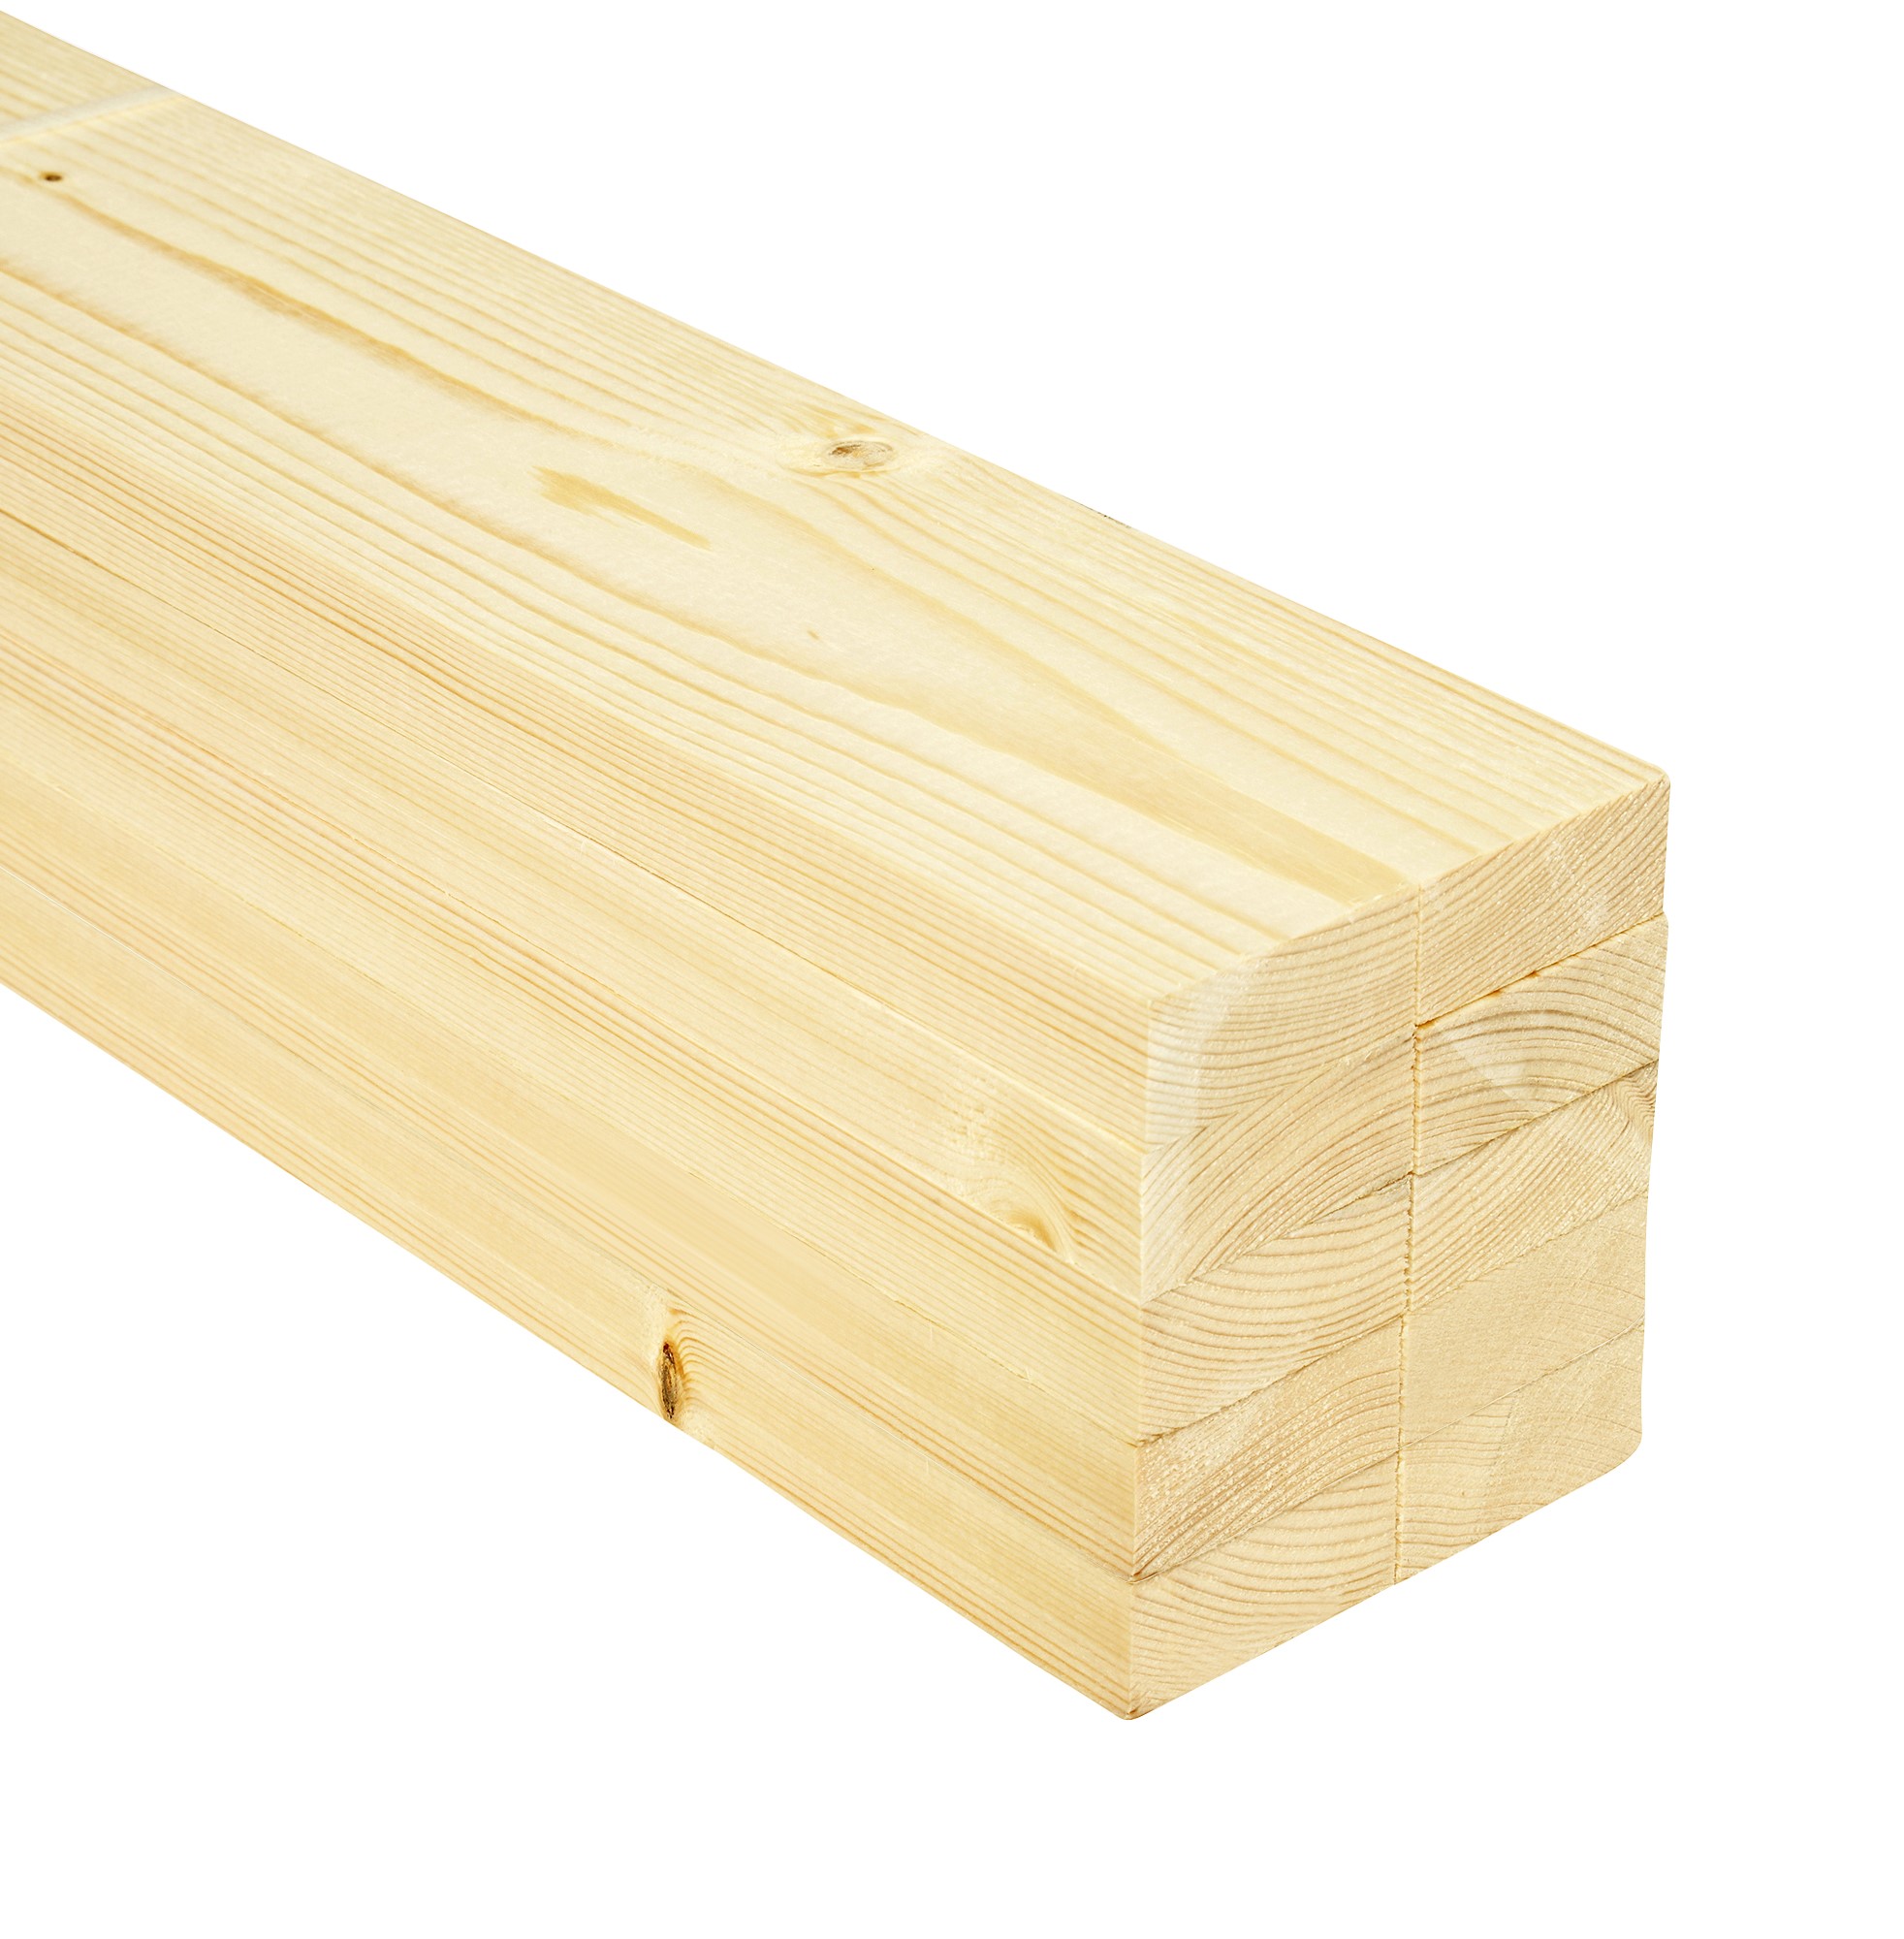 Image of Wickes Sawn Kiln Dried Timber - 22 x 47 x 1800mm - Pack of 10